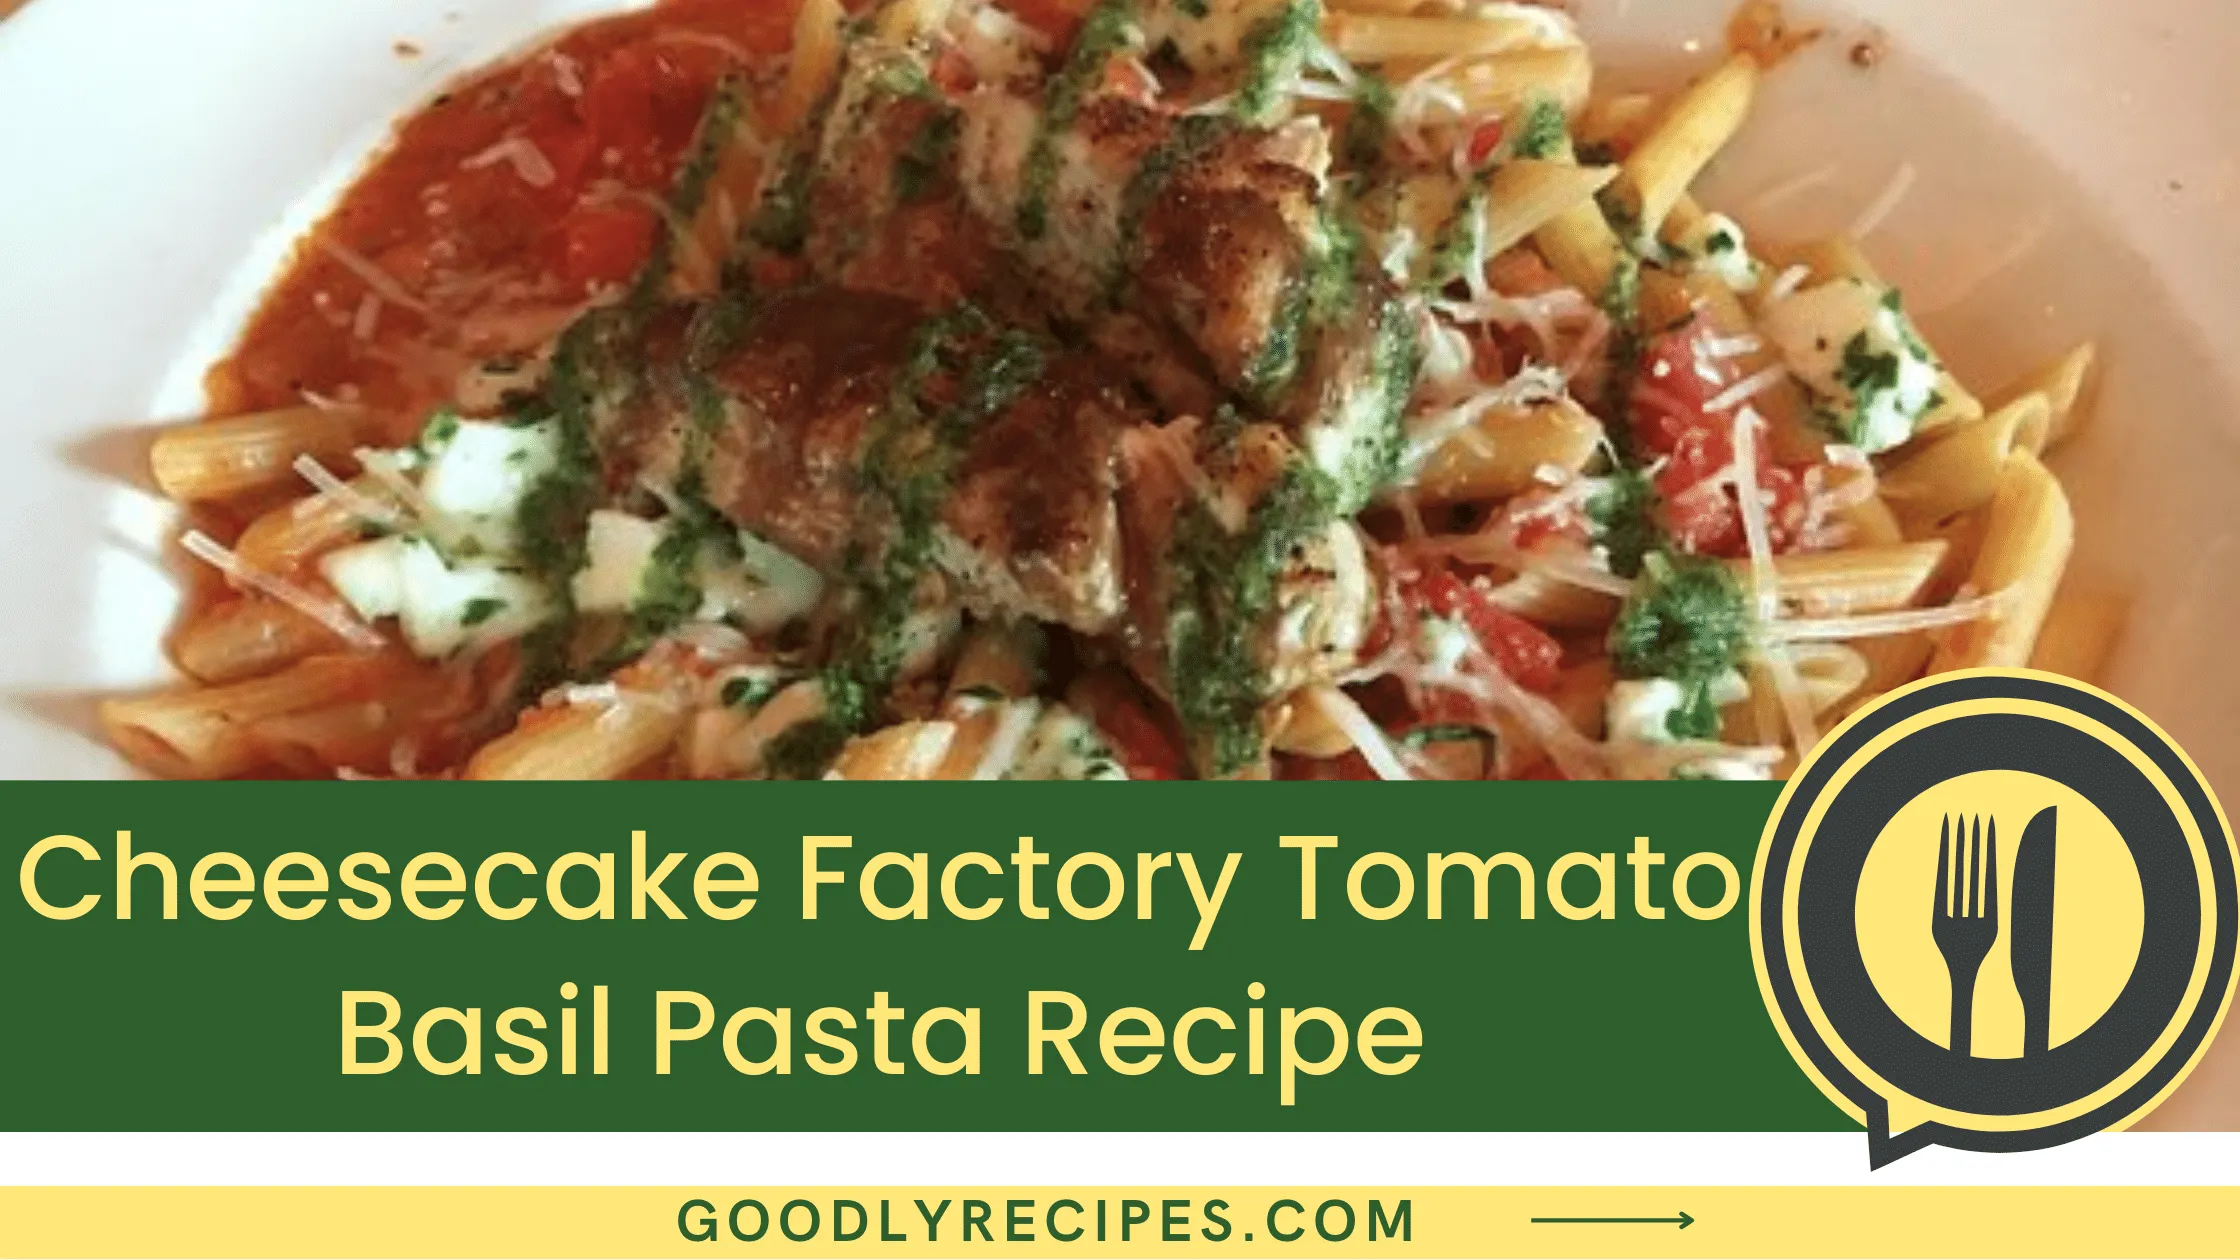 Cheesecake Factory Tomato Basil Pasta Recipe - For Food Lovers